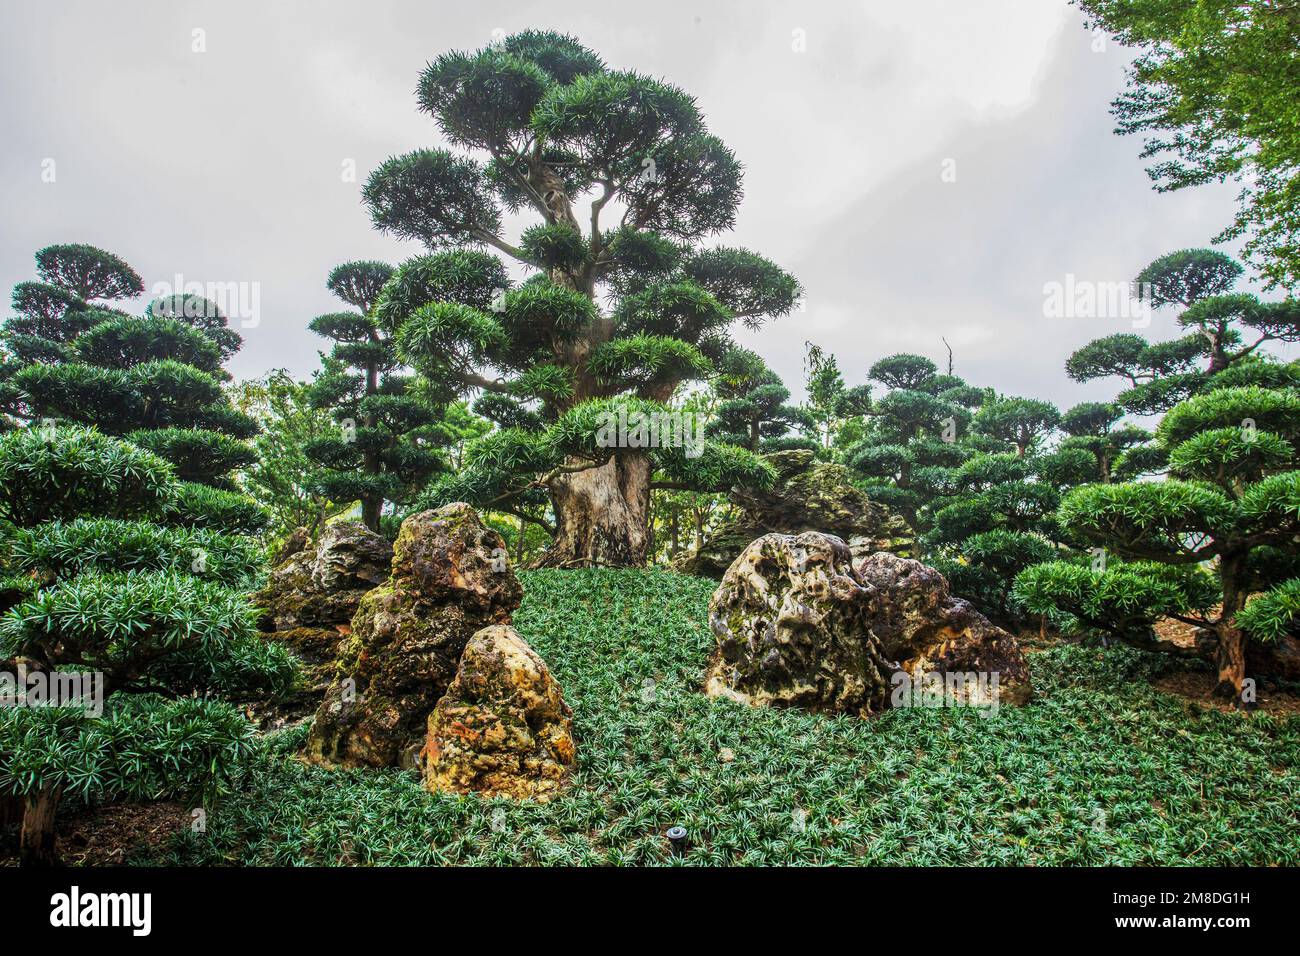 Superb View of the rocks  in Nan Lian Park with idyllic topiary podocarpus and pine trees and ophiopogon japonicus in tropical Hong Kong. Stock Photo